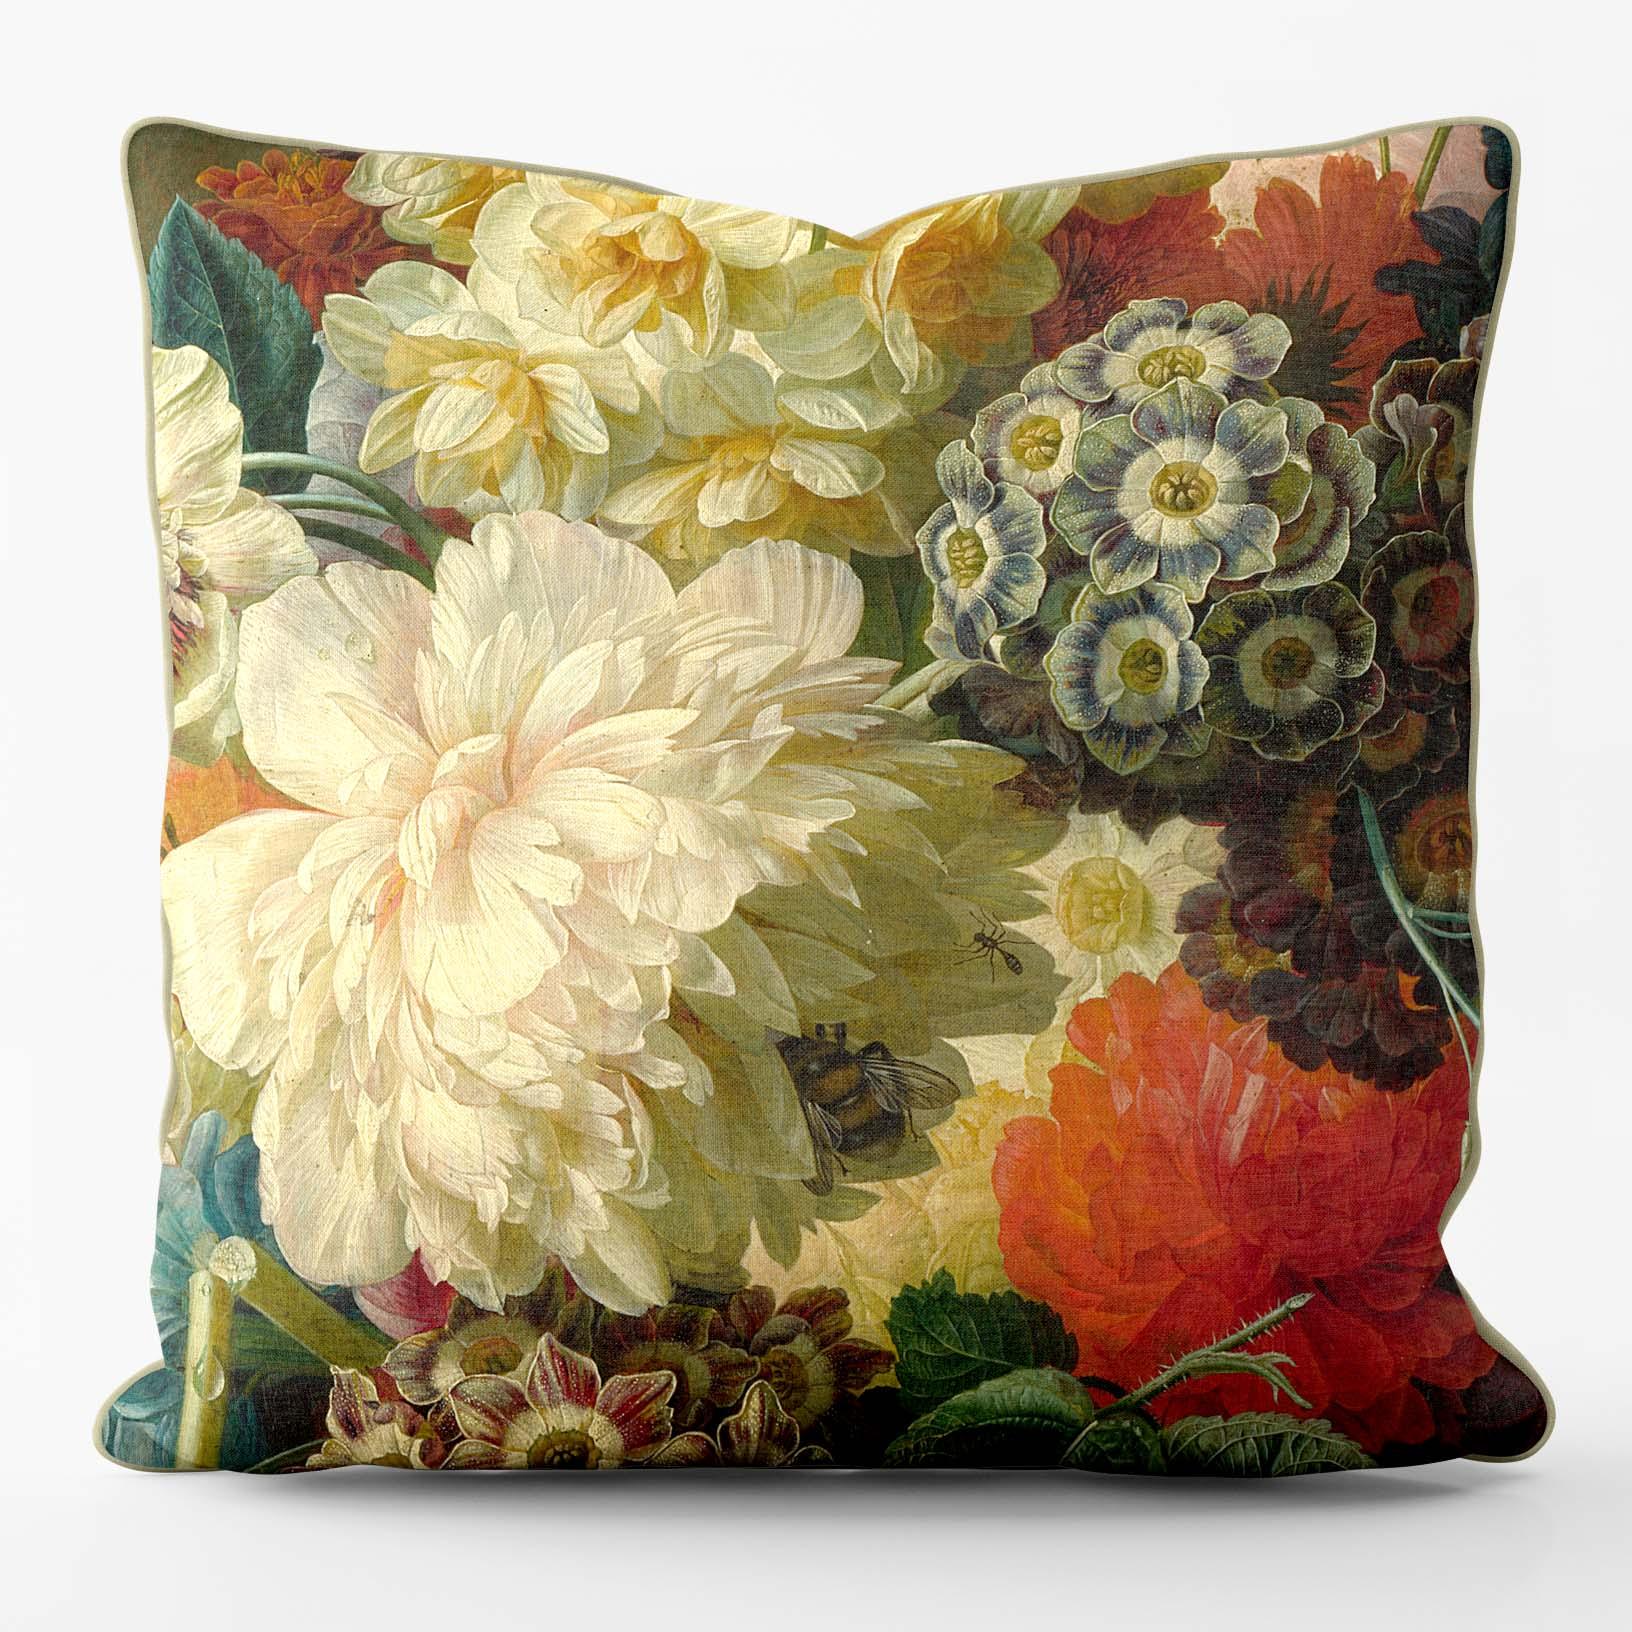 Luxe Van Brussel Flowers In a Vase Detail Auricula - National Gallery Cushion - Handmade Cushions UK - WeLoveCushions